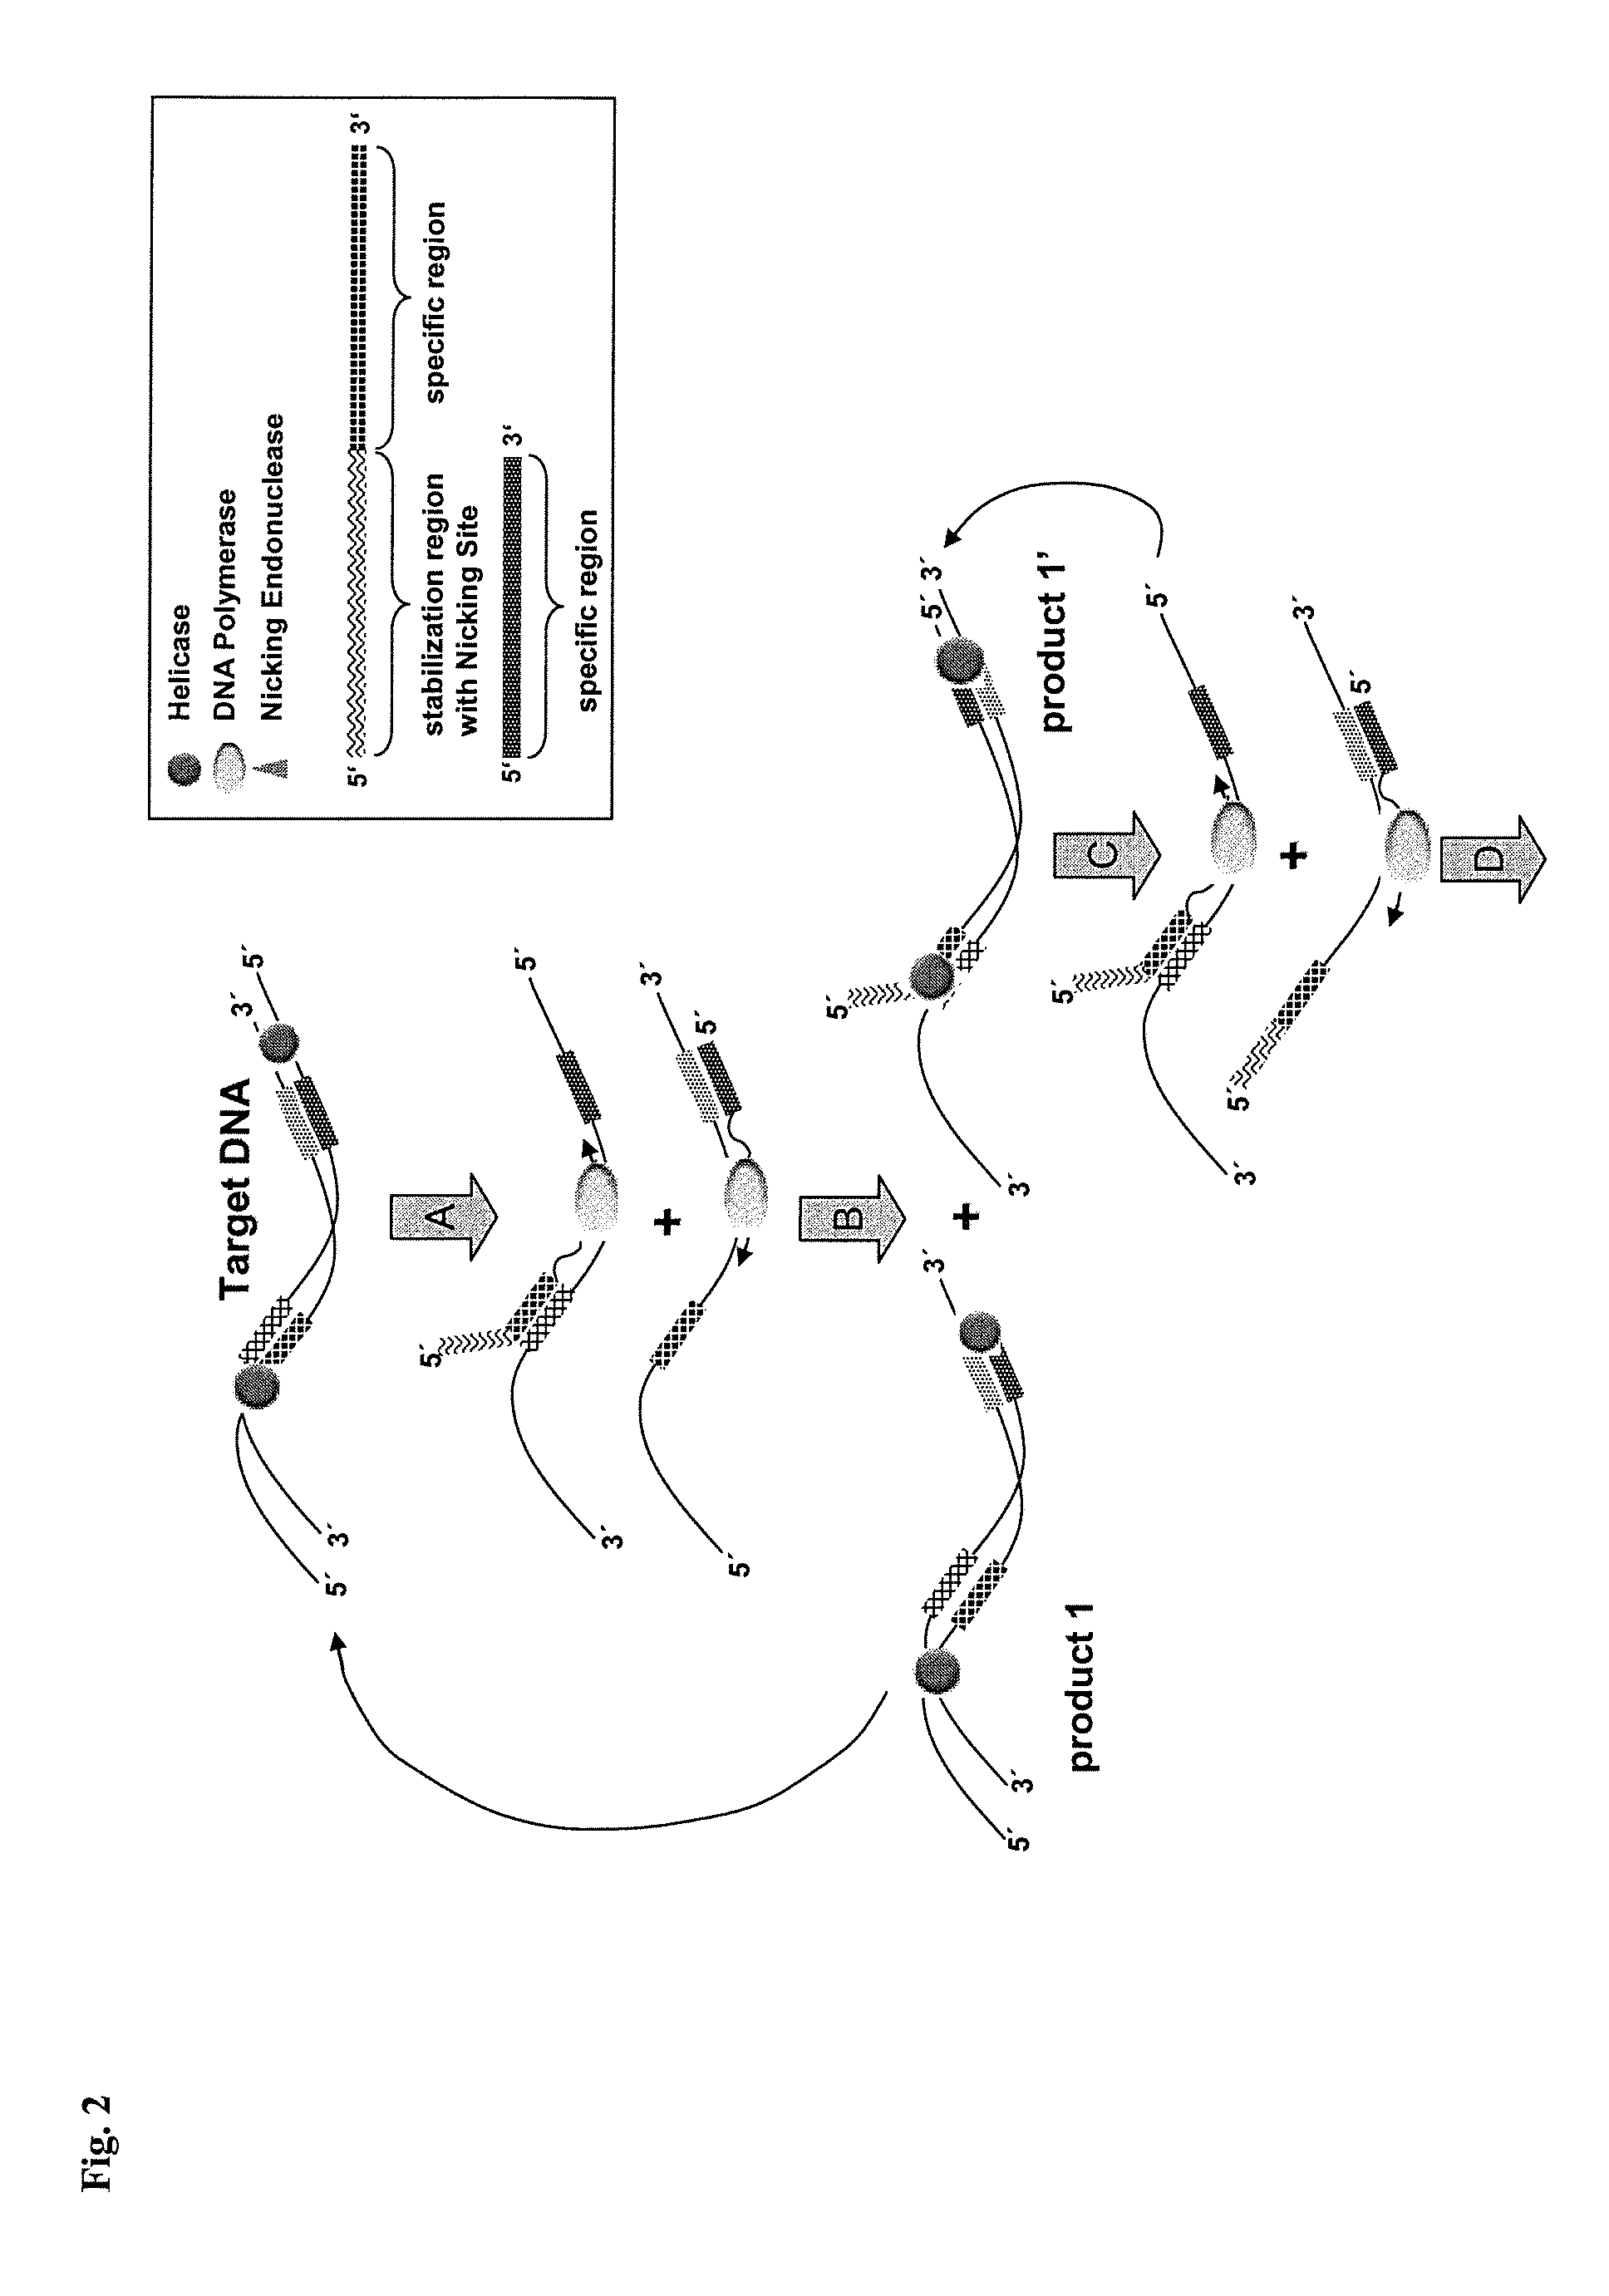 Helicase dependent isothermal amplification using nicking enzymes